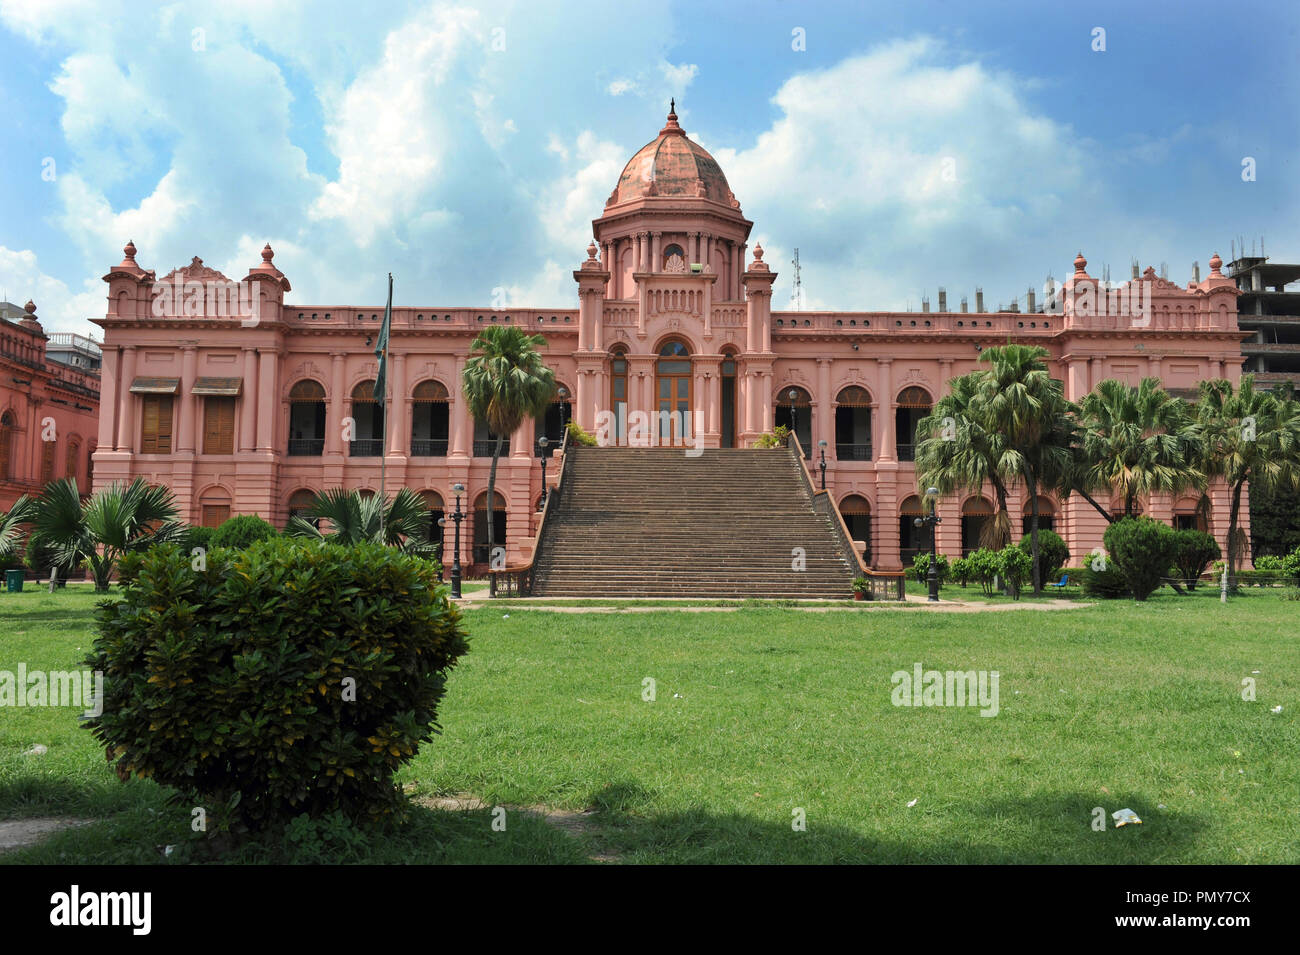 Dhaka, Bangladesh - June 05, 2015: Ahsan Manzil was the official residential palace and seat of the Nawab of Dhaka. The building is situated at Kumart Stock Photo